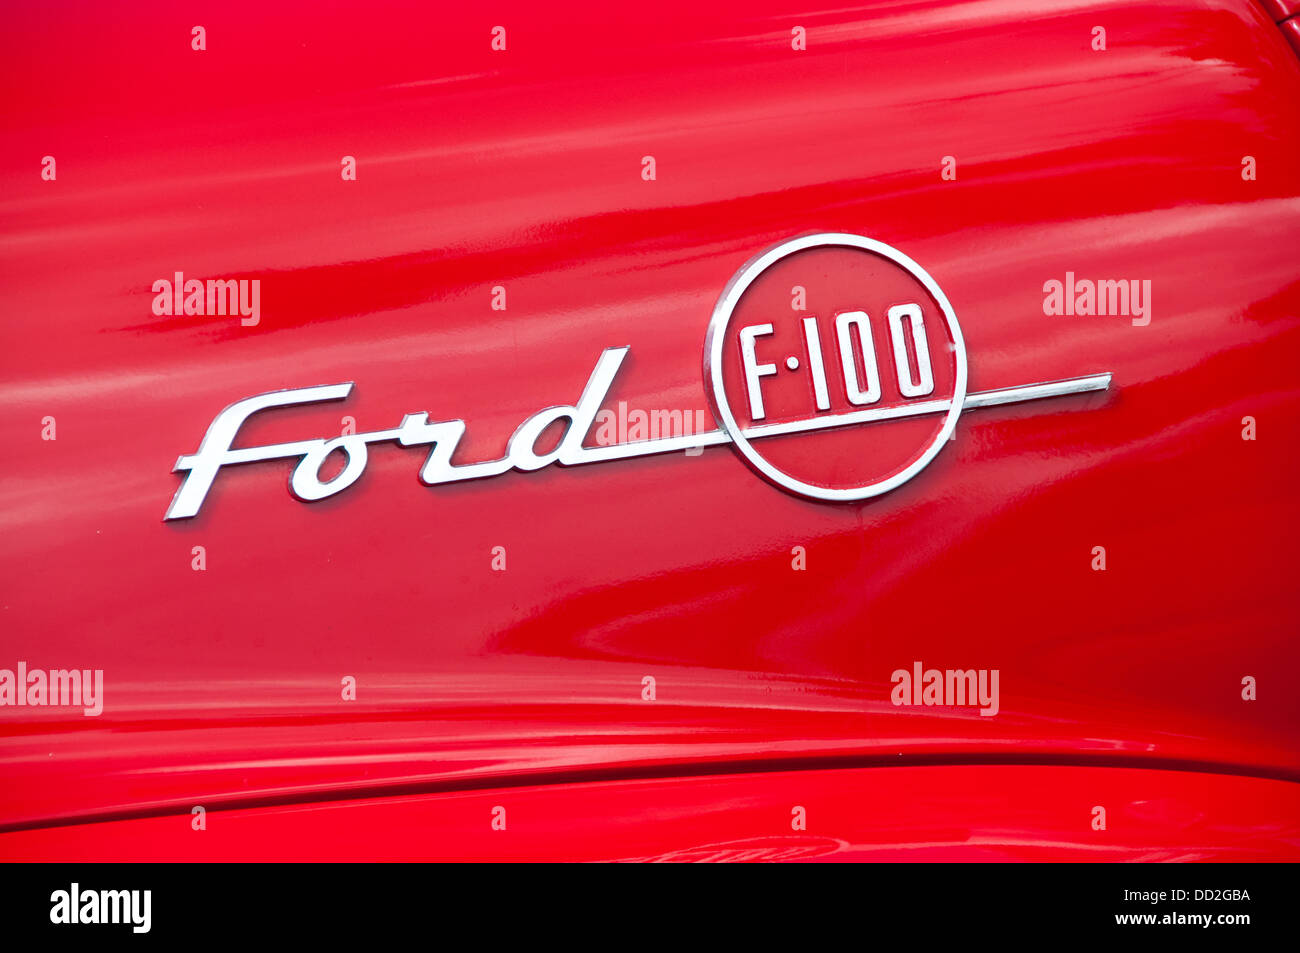 Ford truck exterior Stock Photo